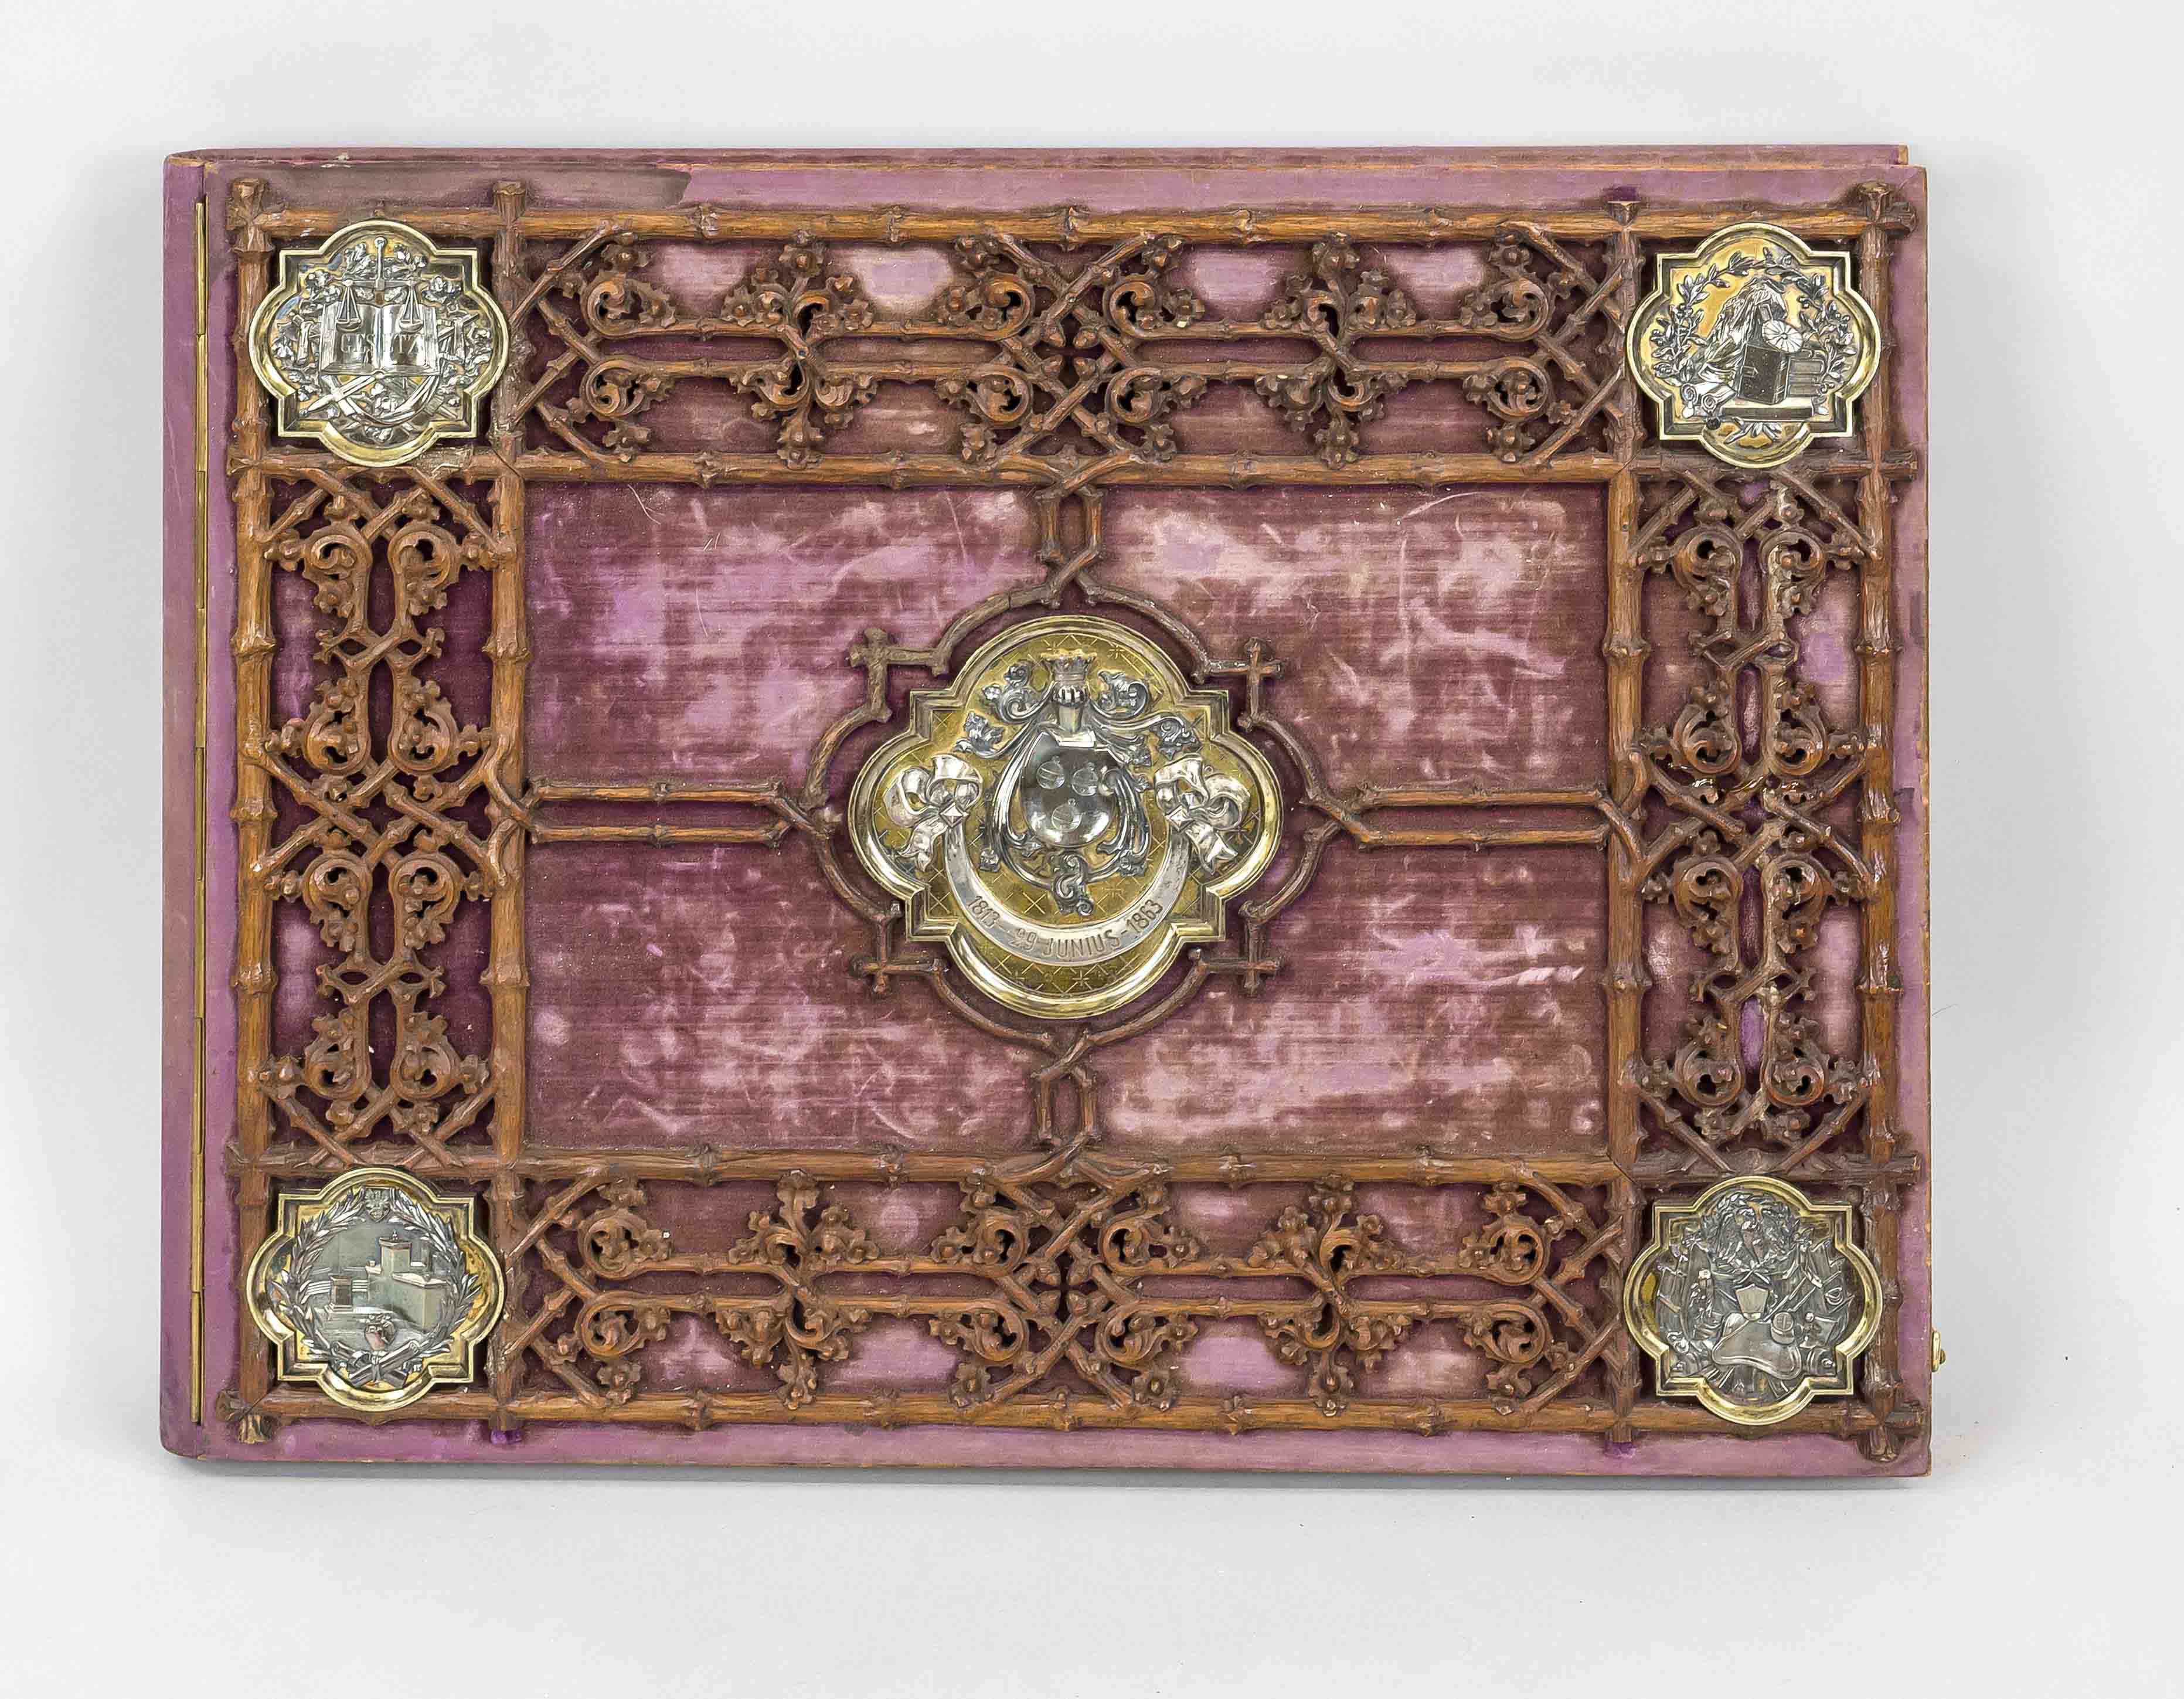 Large ceremonial binding/folder, 19th century, purple velvet, applied carved branches, four-pass